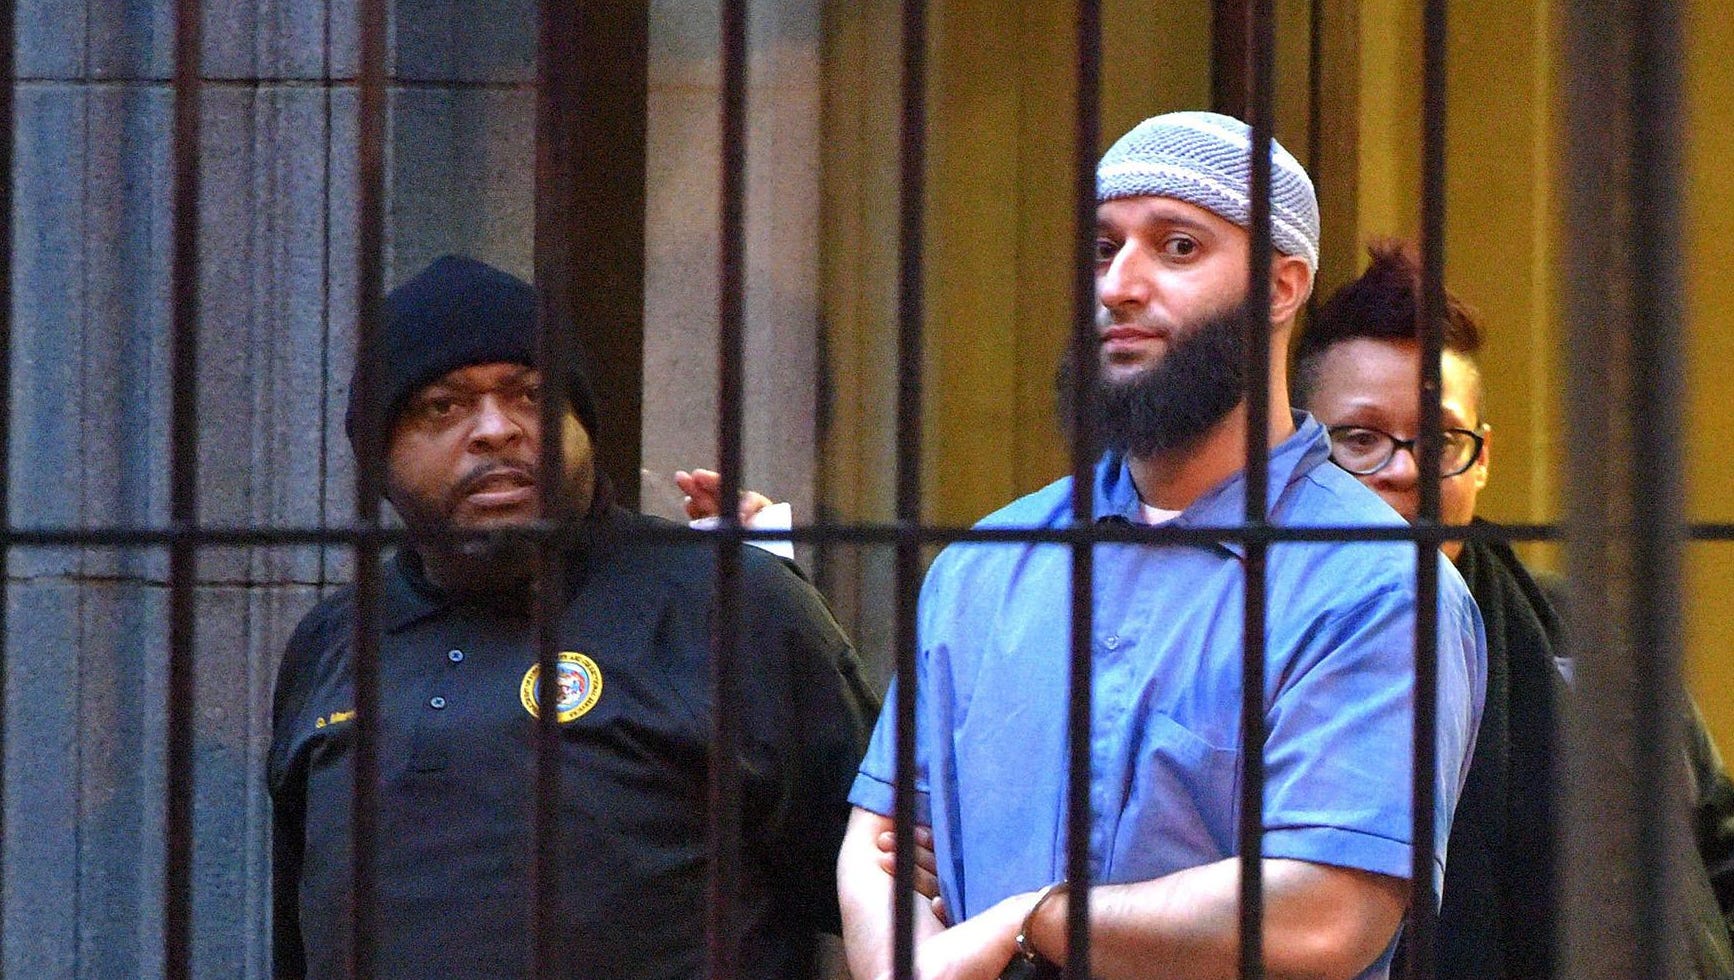 Adnan Syed, whose case was on 'Serial,' granted new trial